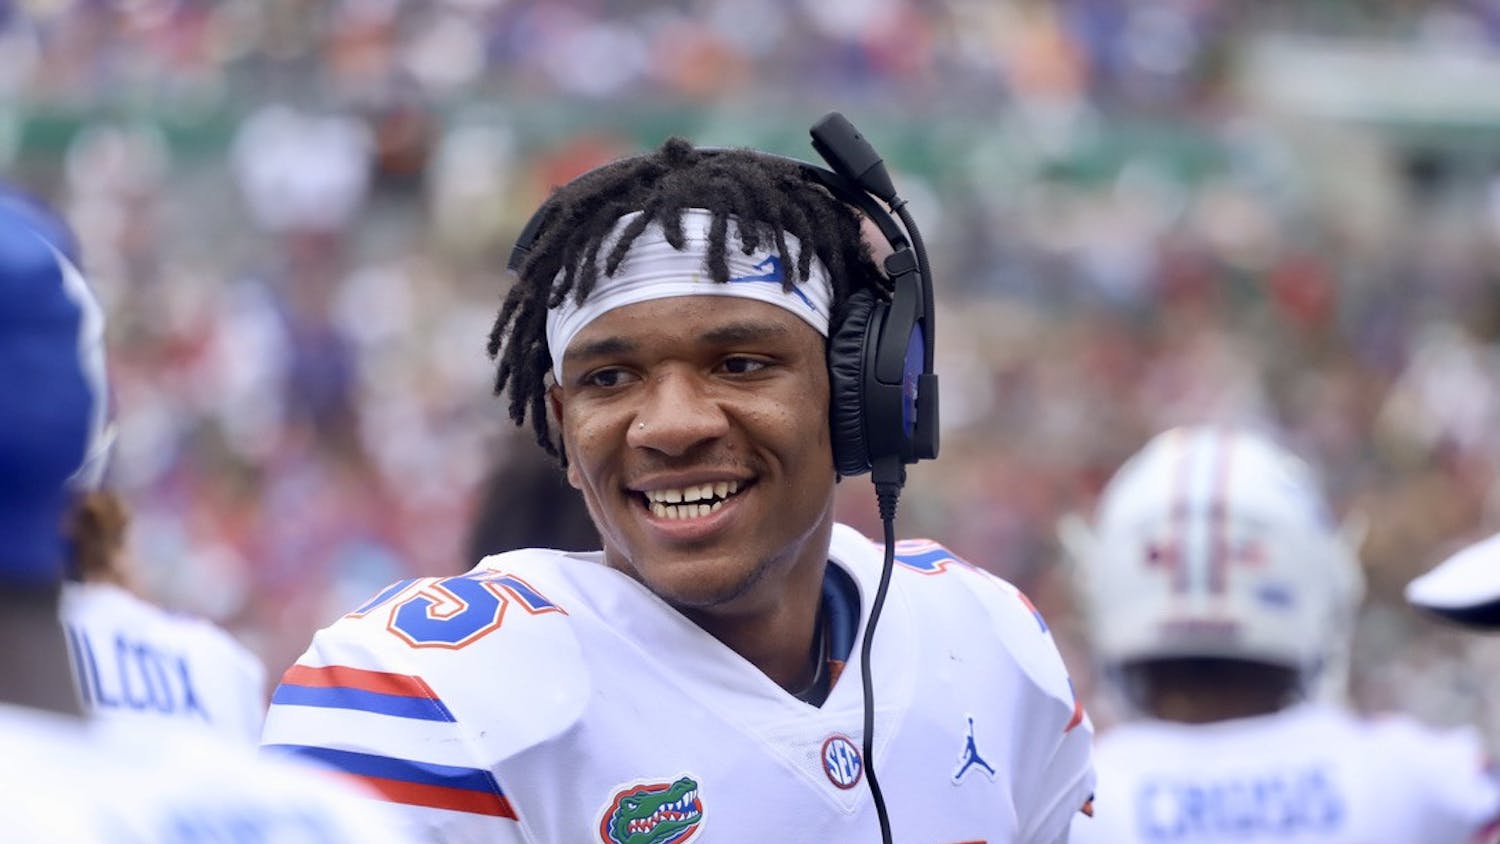 Florida quarterback Anthony Richardson on the sidelines during the Gators’ 42-20 win over South Florida on Sept. 11, 2021. Richardson was named SEC Offensive Player of the Week Monday afternoon.